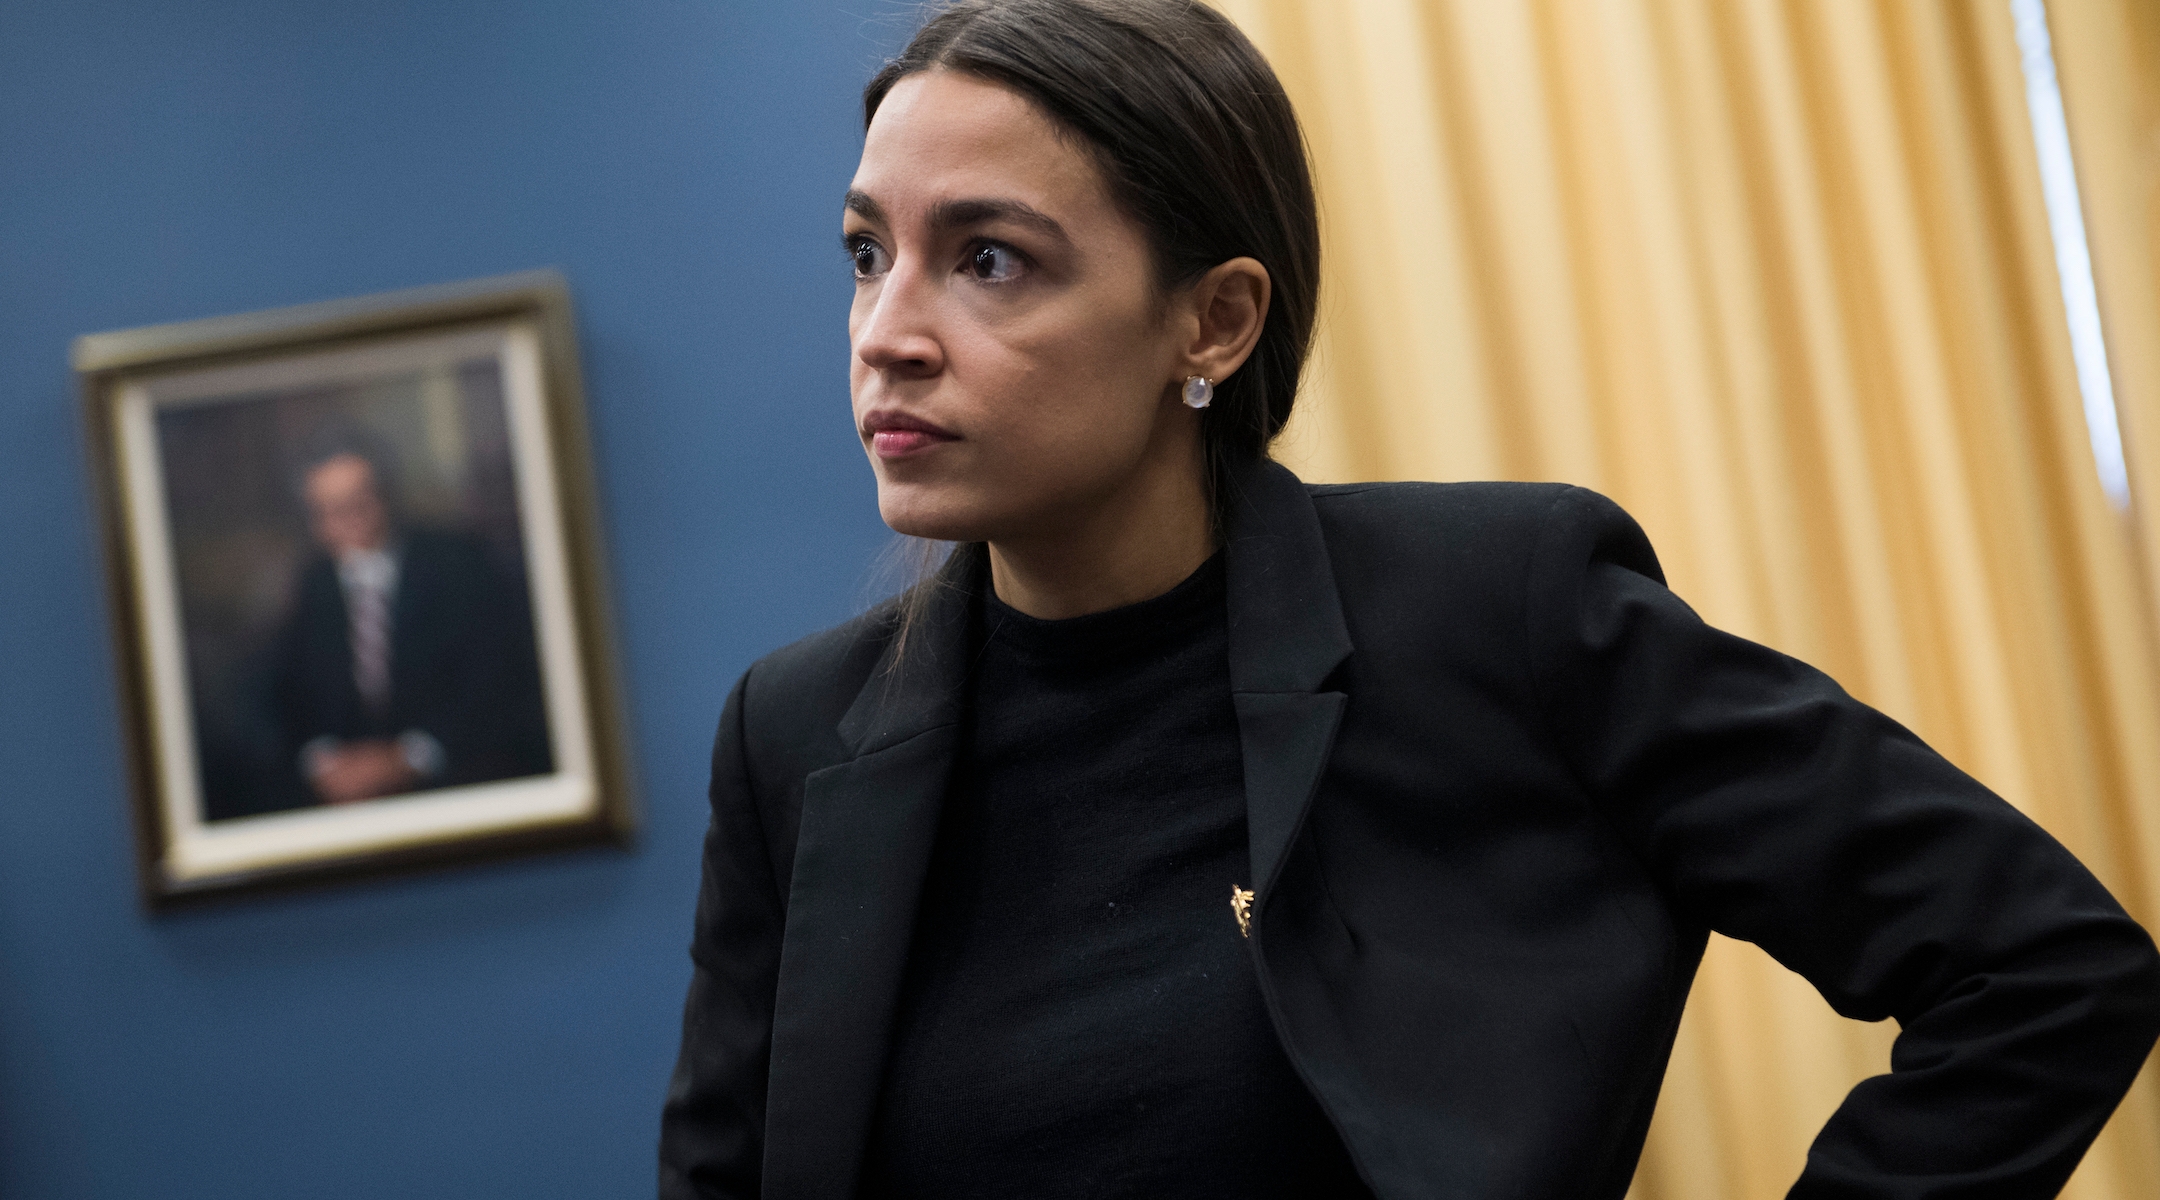 Alexandria Ocasio-Cortez at a briefing in the Rayburn Building in Washington, D.C., May 23, 2019. She has sparked a debate about the use of the term "concentration camps." (Tom Williams/CQ Roll Call)